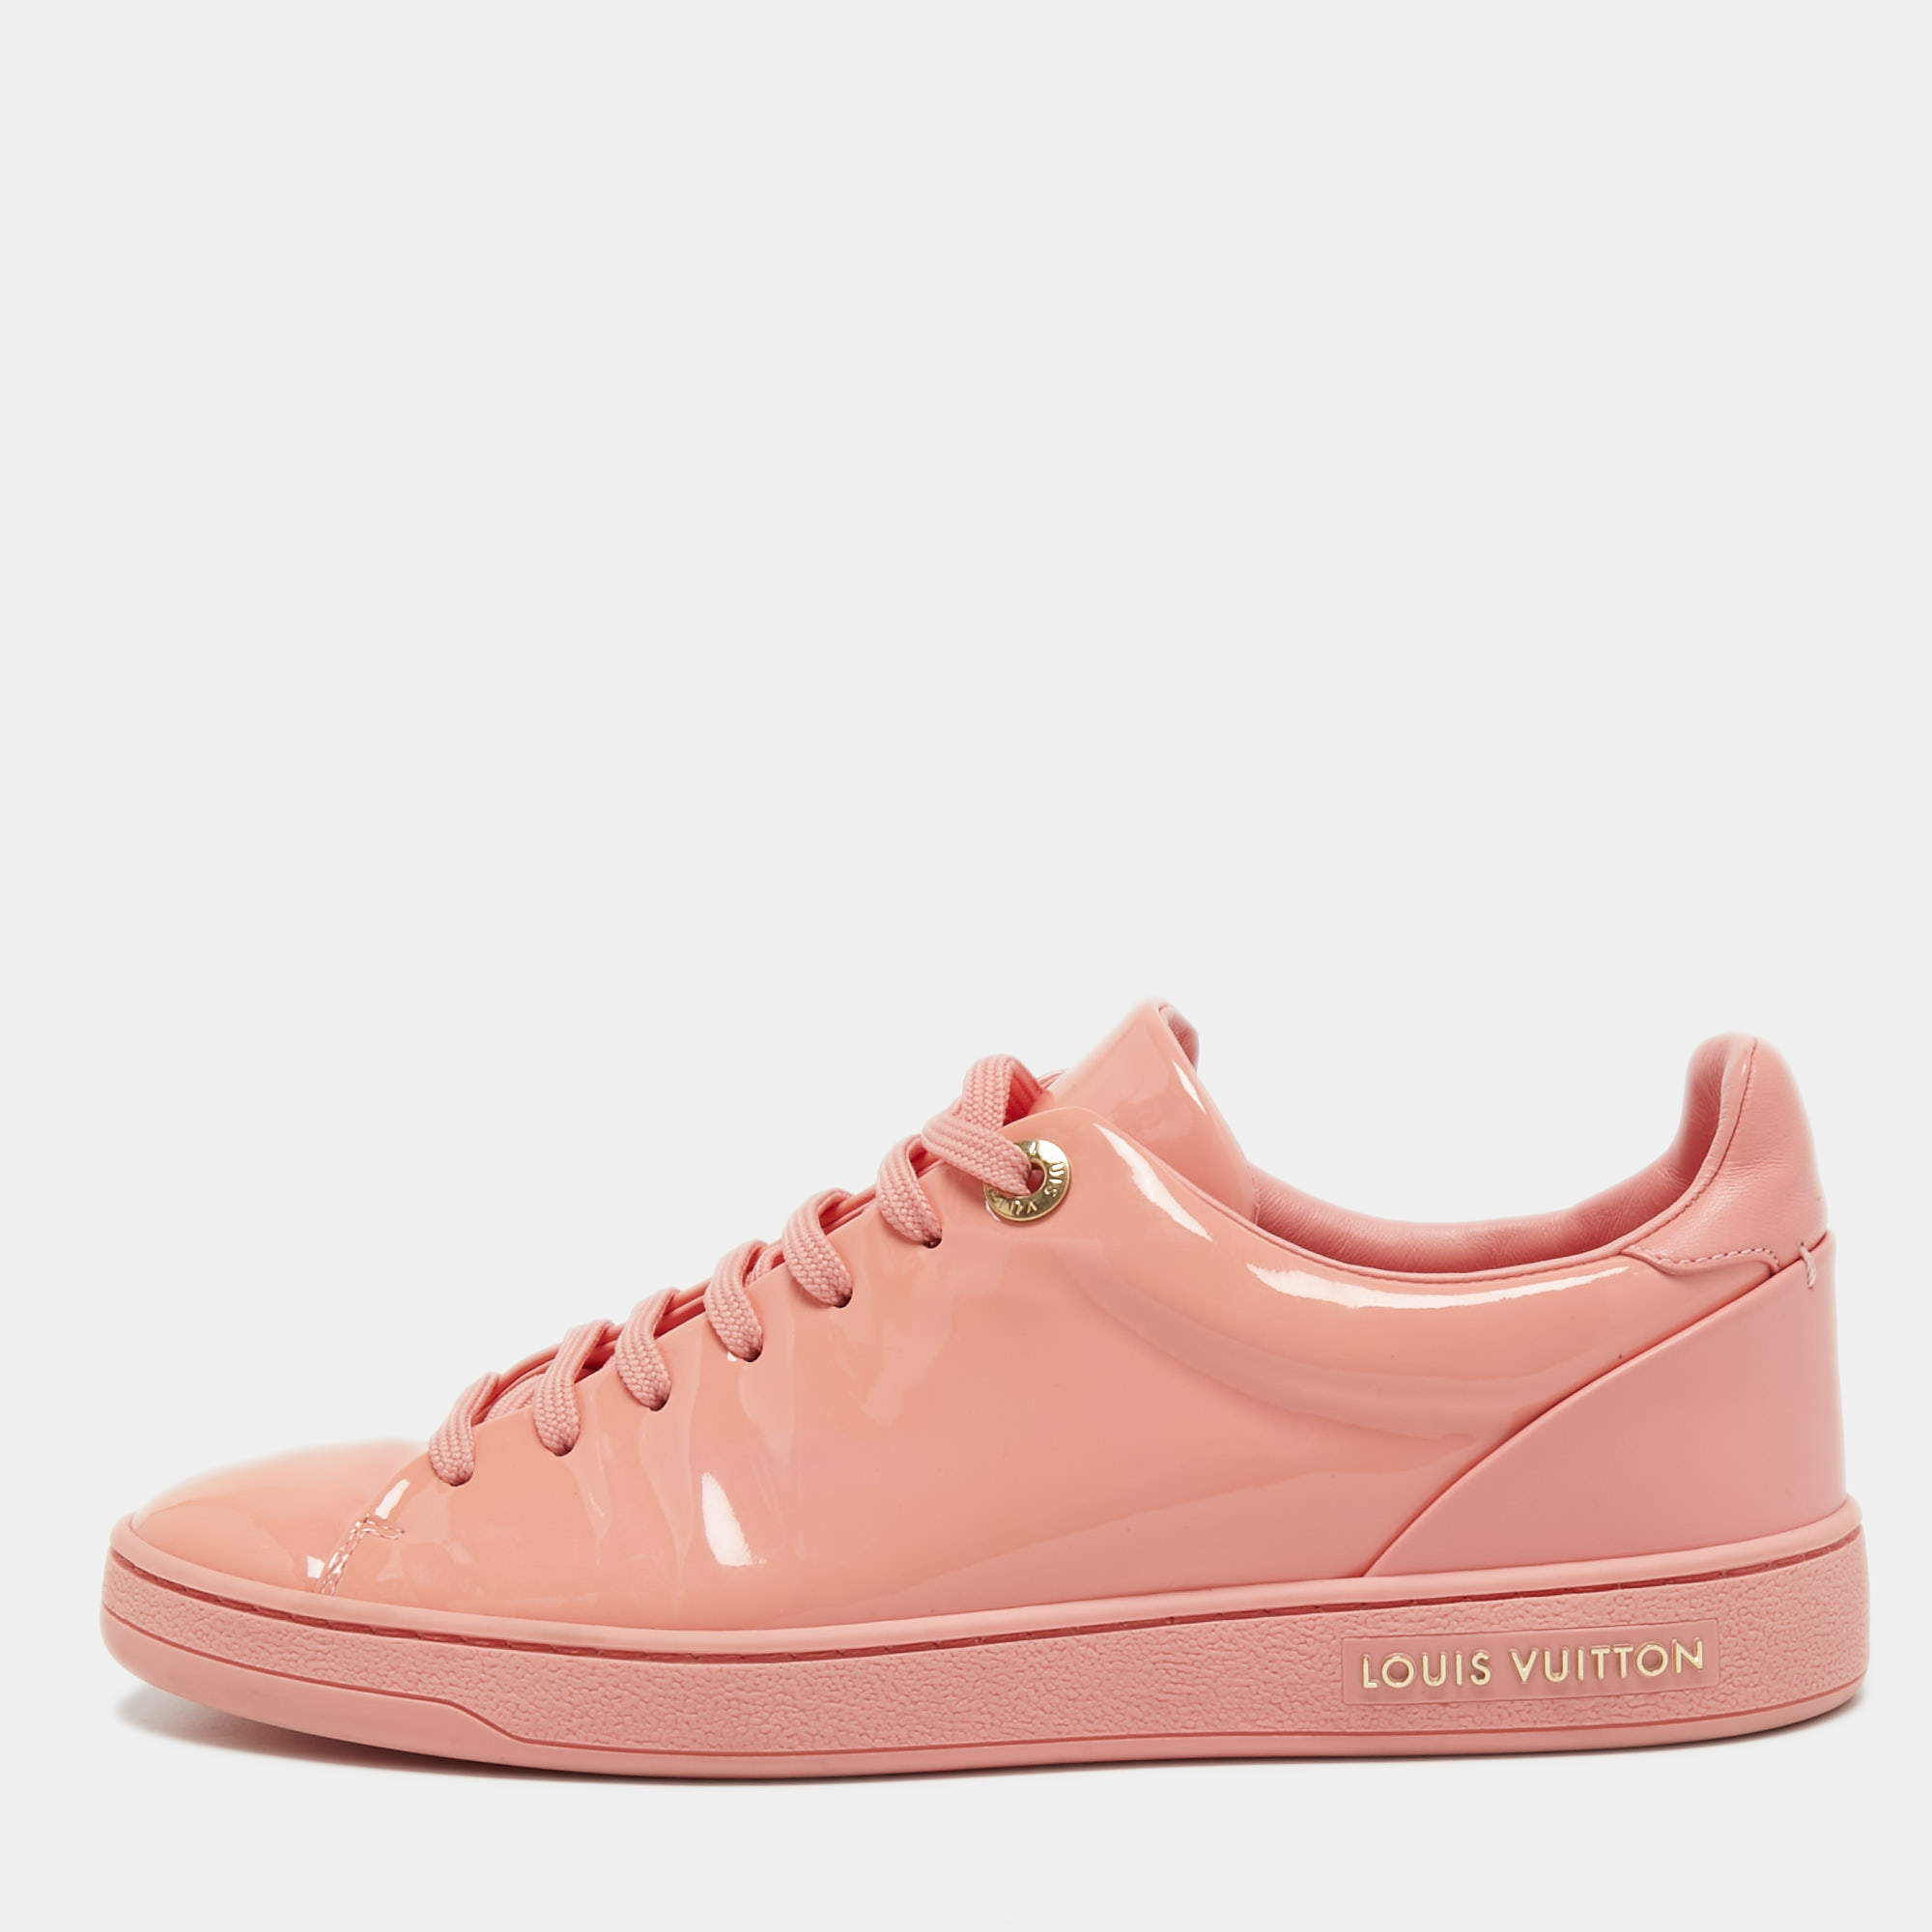 Louis Vuitton Pink Patent Leather Frontrow Sneakers Size 37